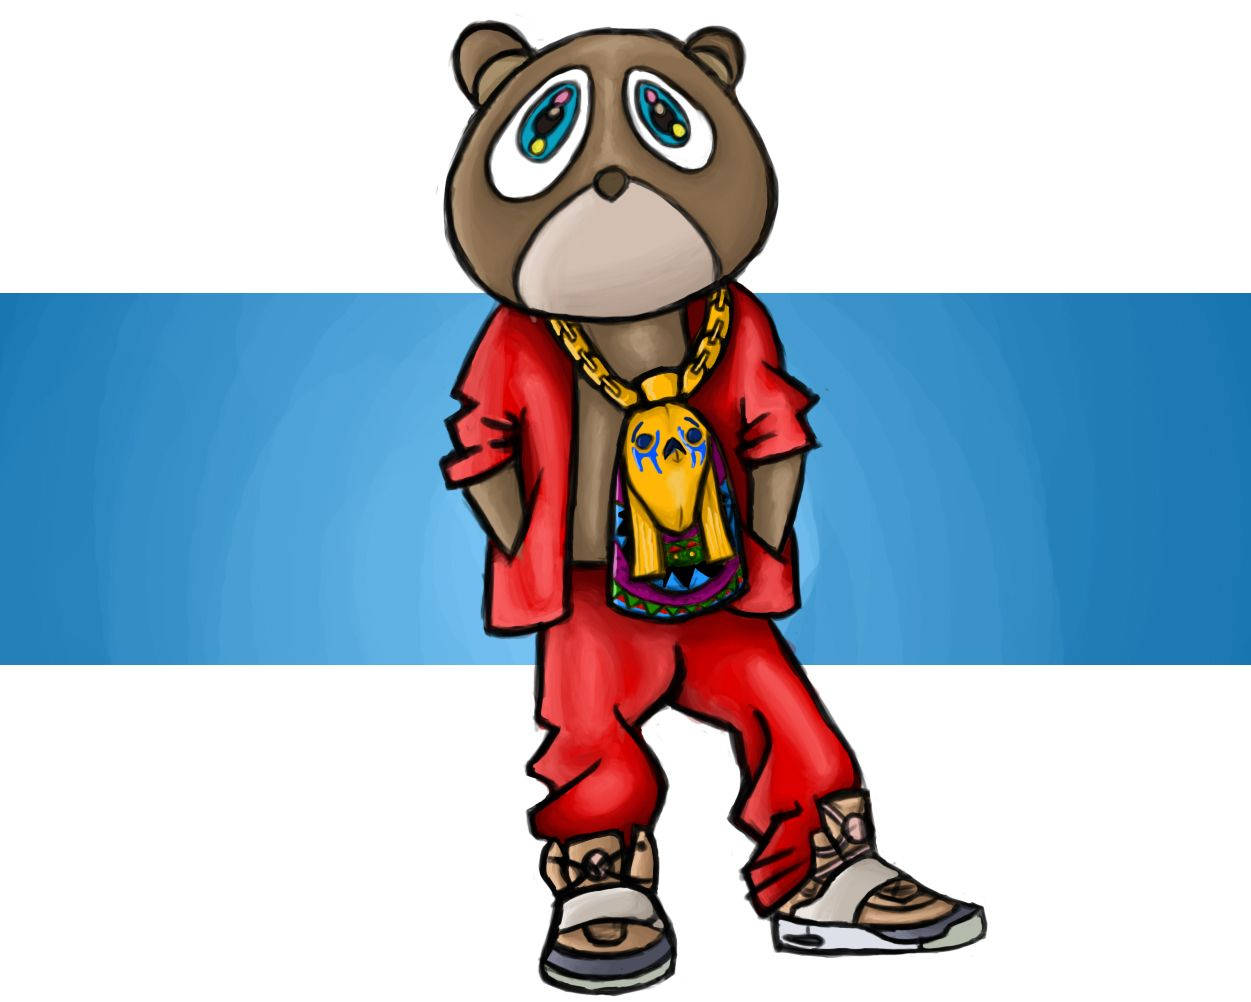 Kanye West Bear Fan Art In Red Clothes Background